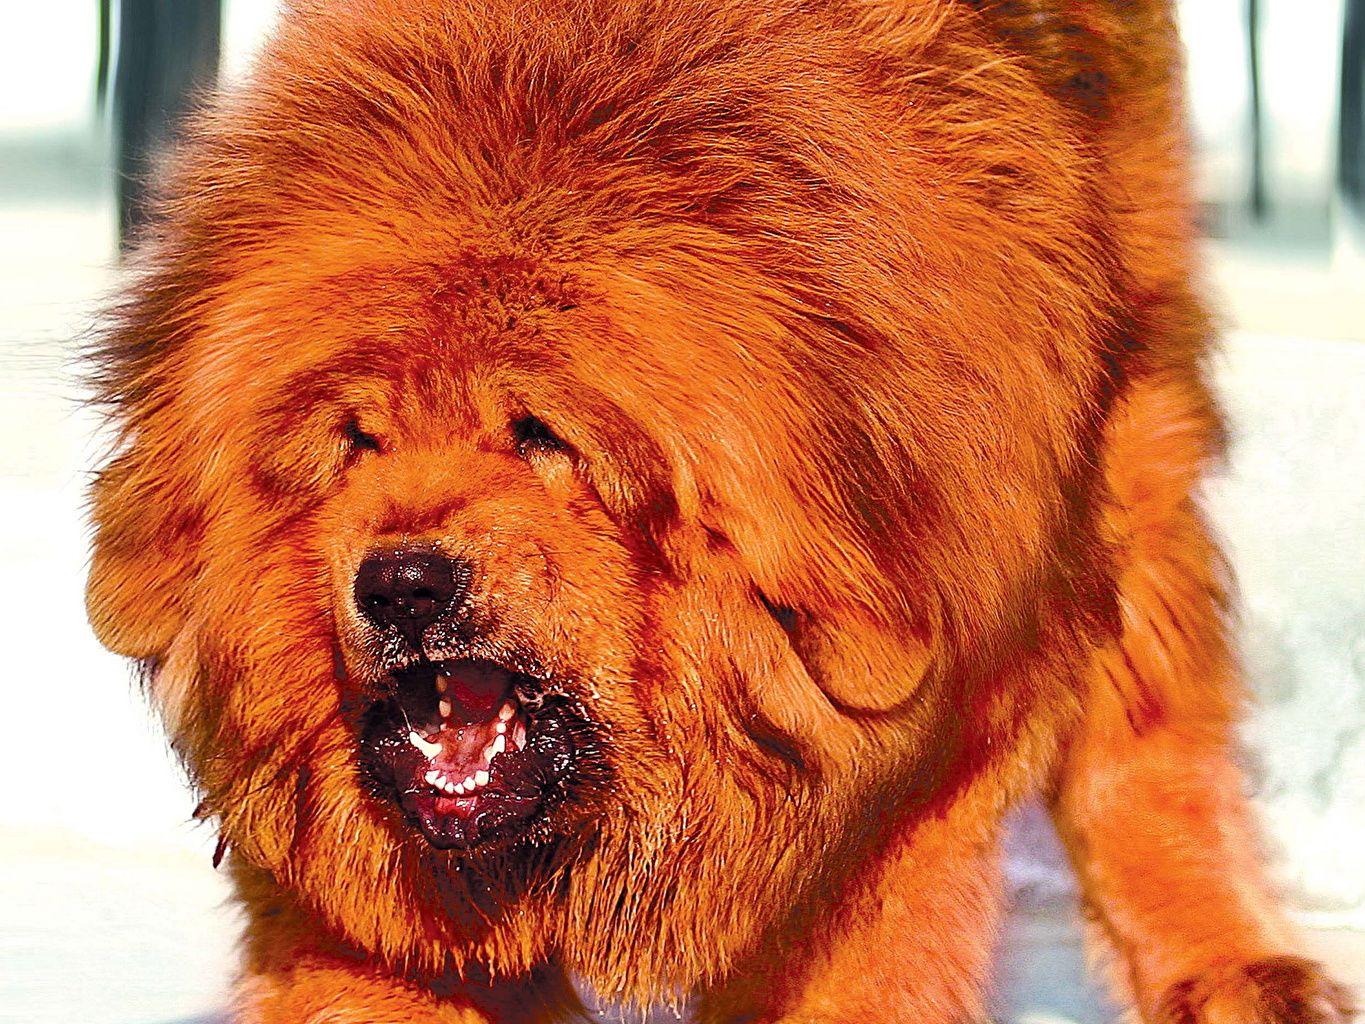 Image Tibetan Mastiff Dogs Ginger color angry Animals